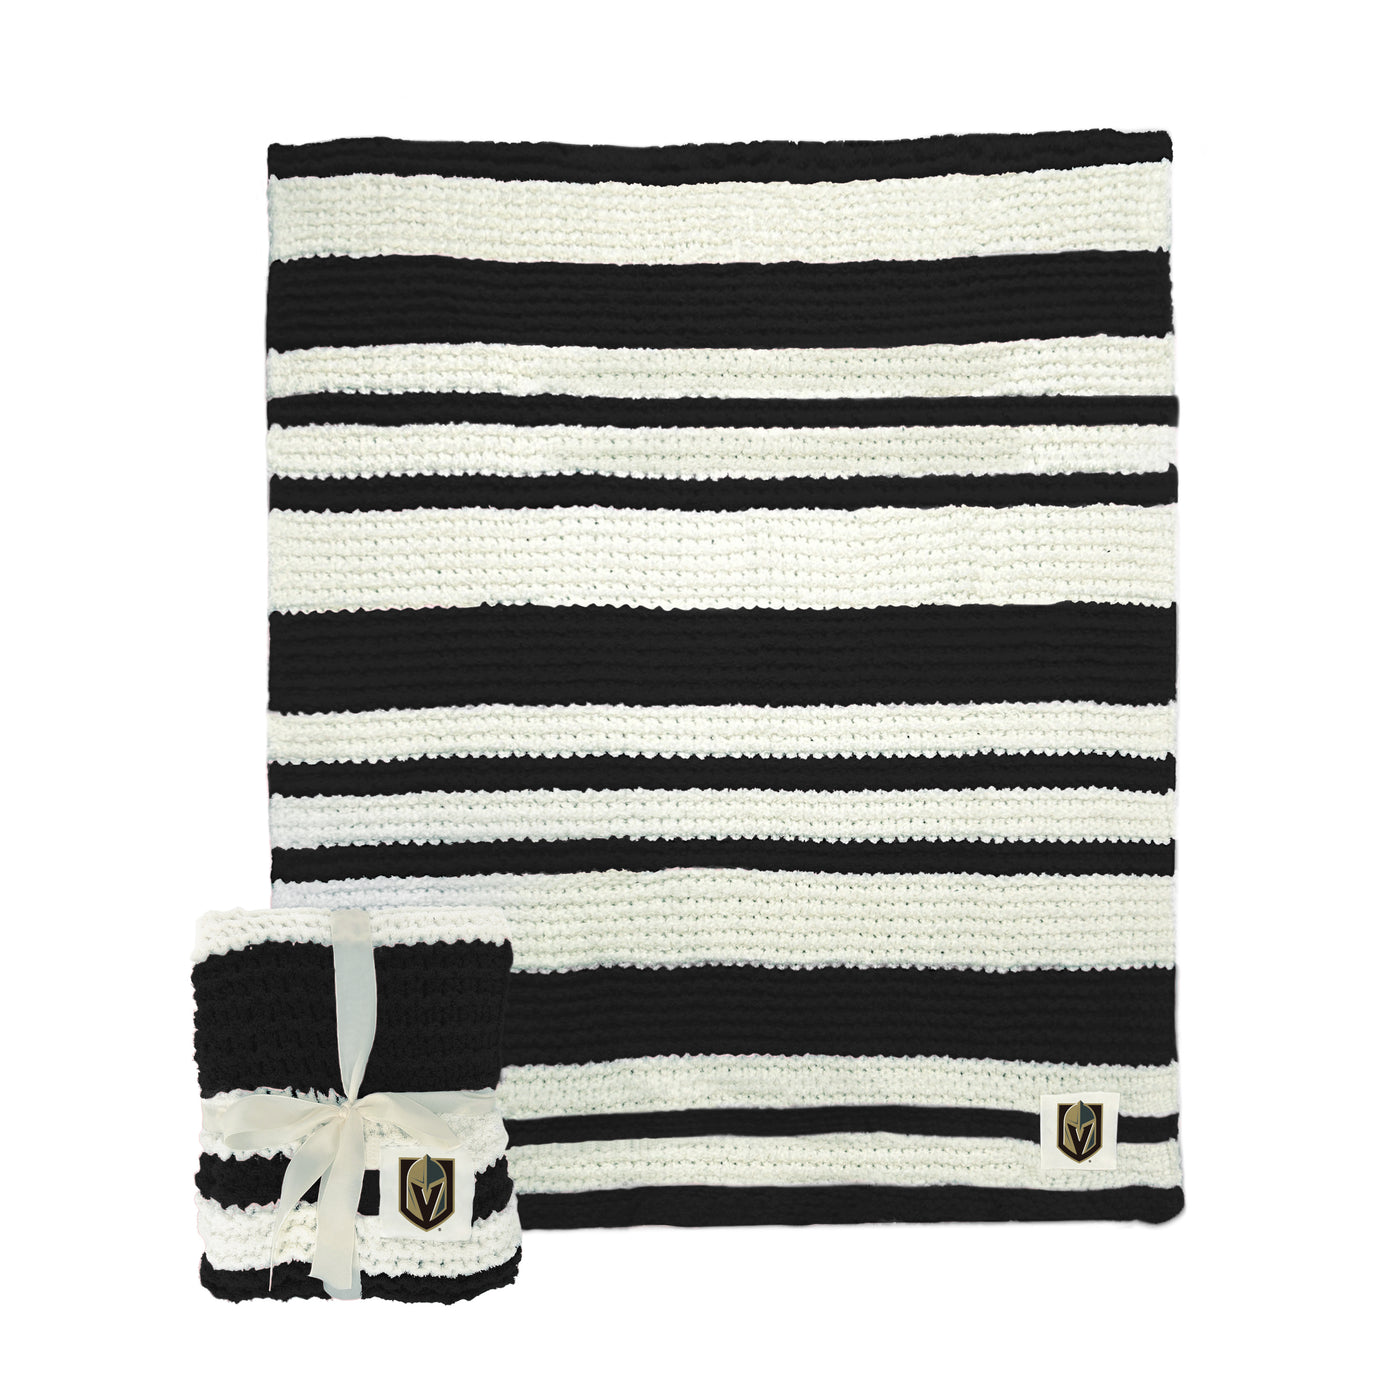 Vegas Golden Knights Cable Knit Throw 50x60